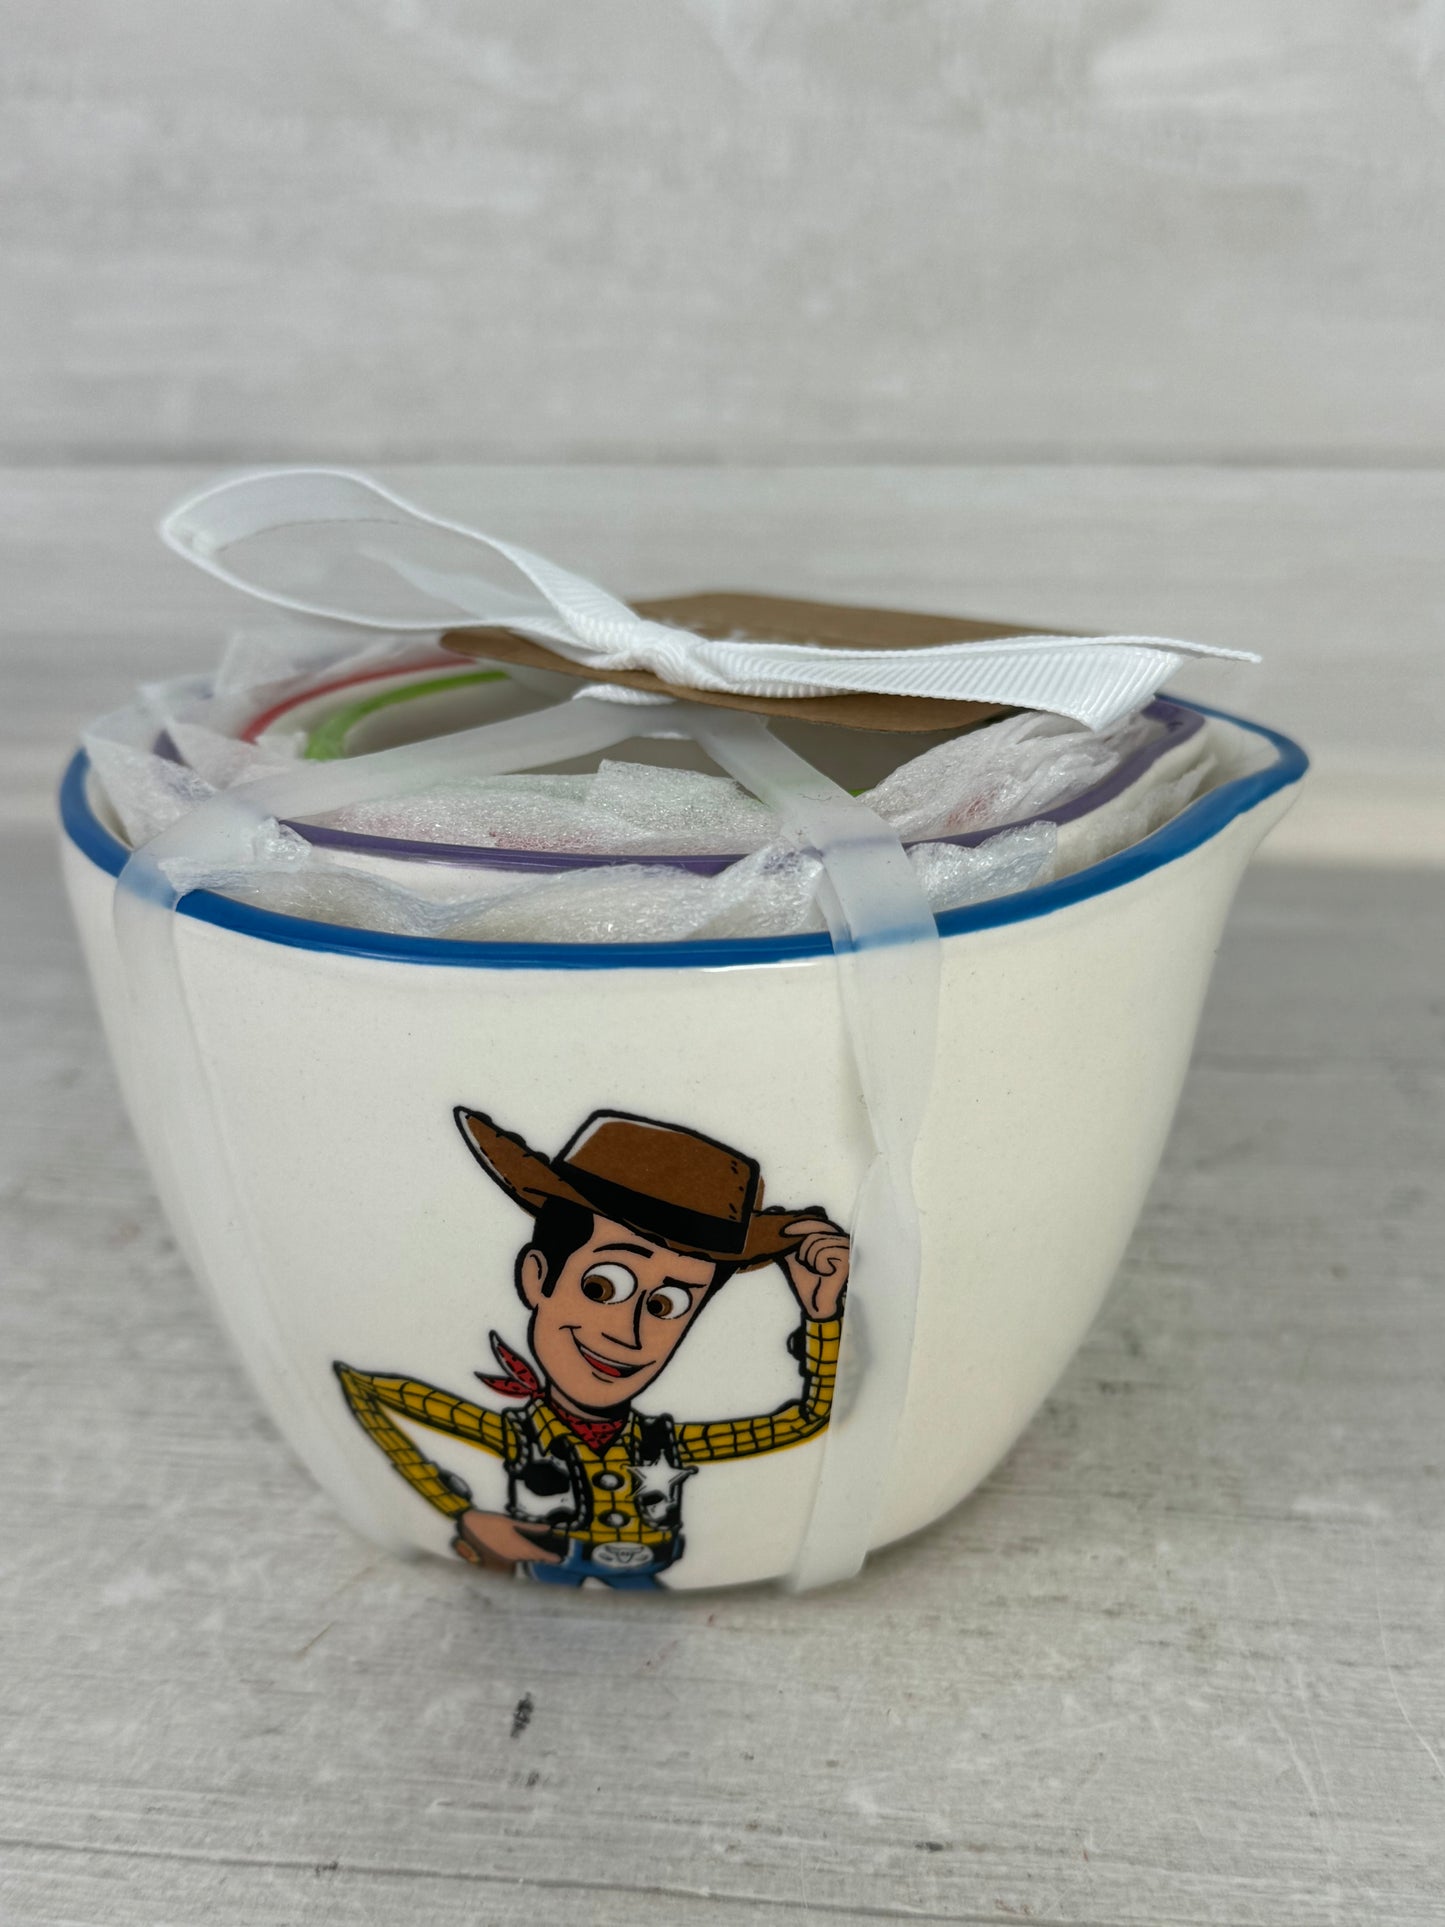 Rae Dunn Toy Story Measuring Cups